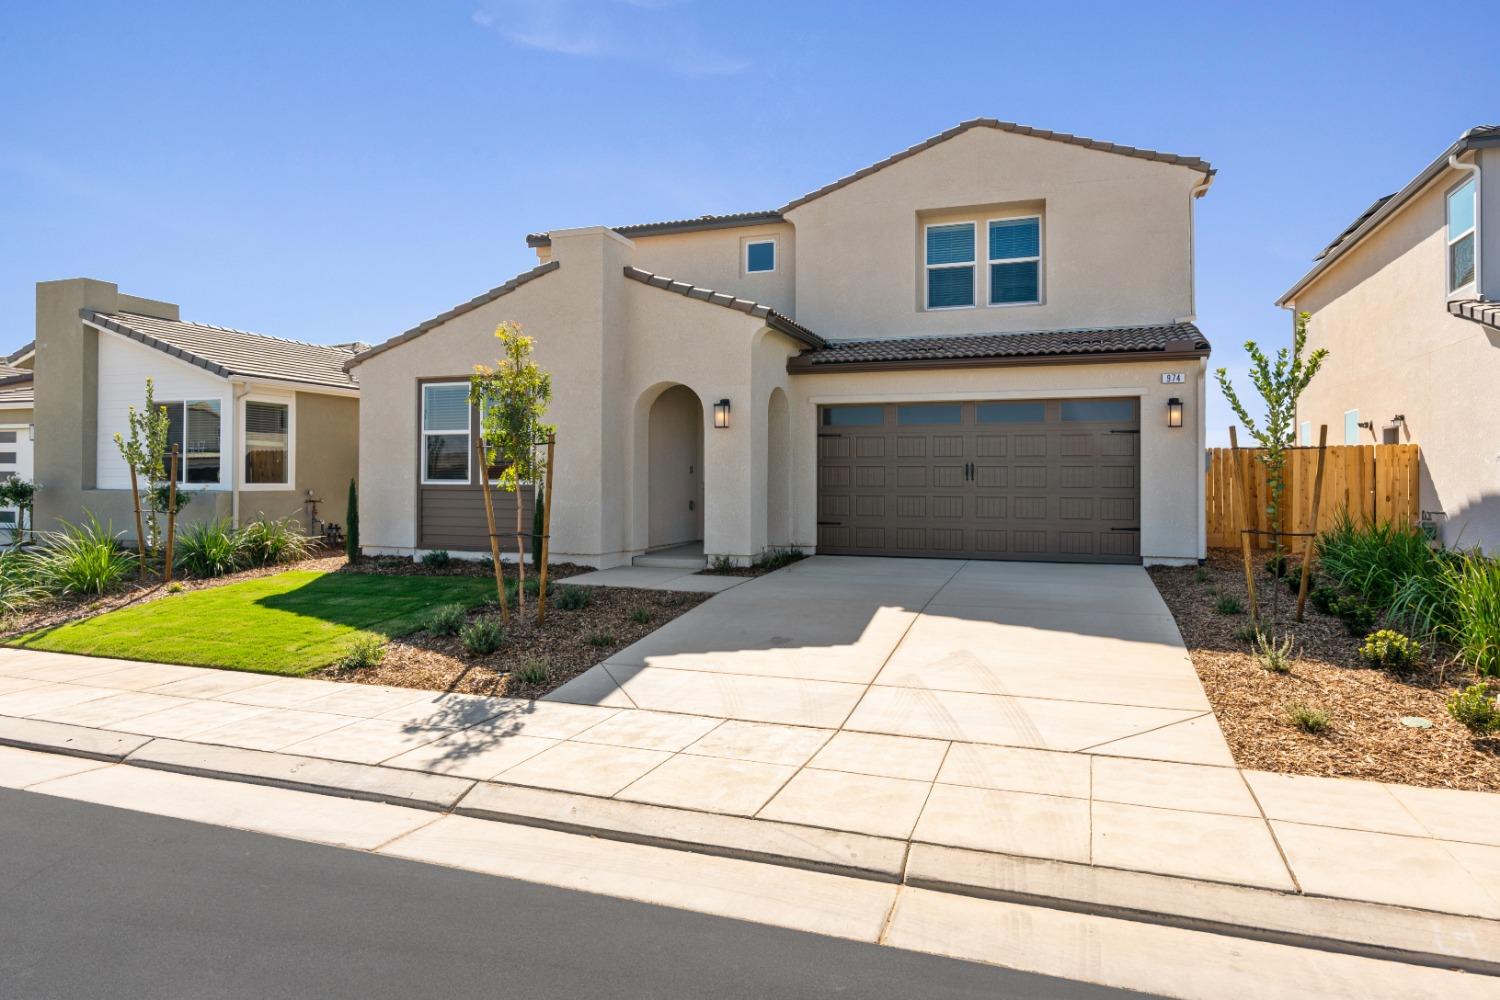 Photo of 710 Traverse Dr in Madera, CA